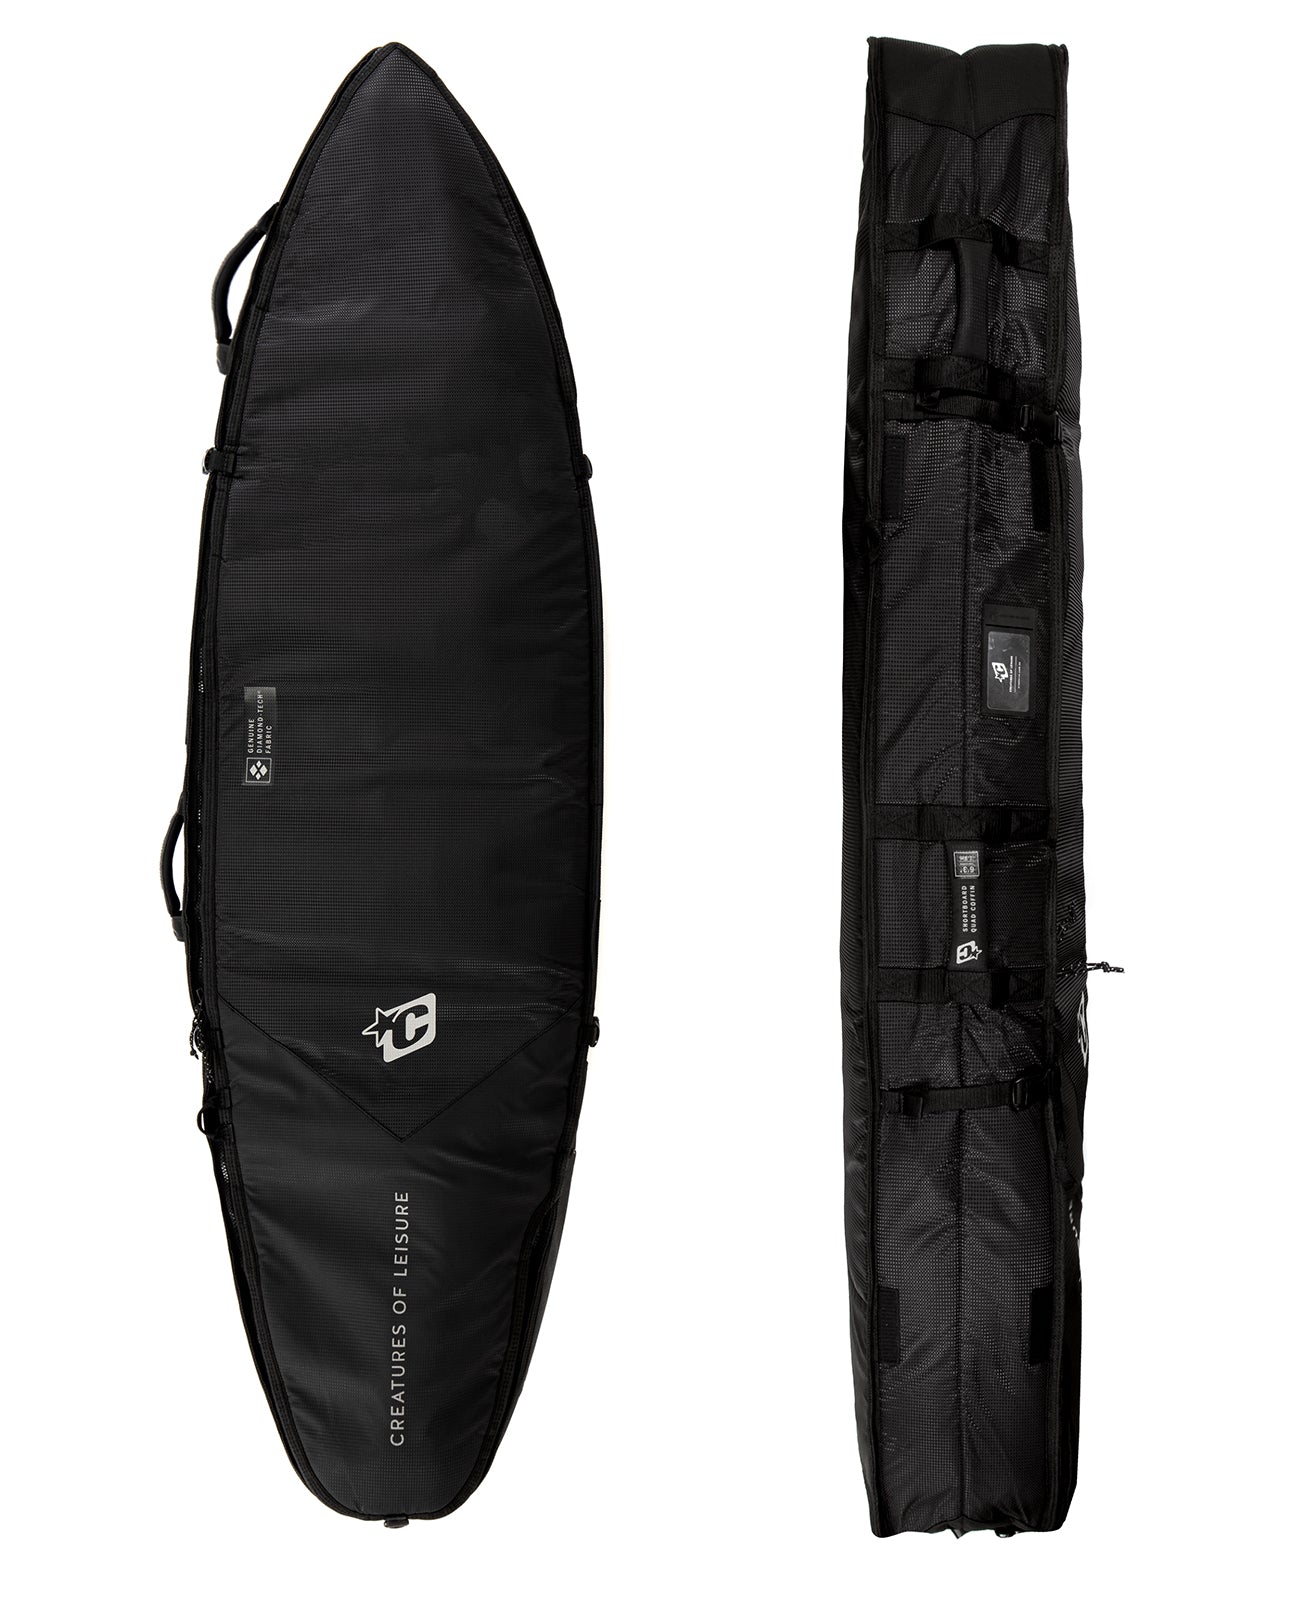 Quad Coffin - Boardcover for Serious Surf Travel